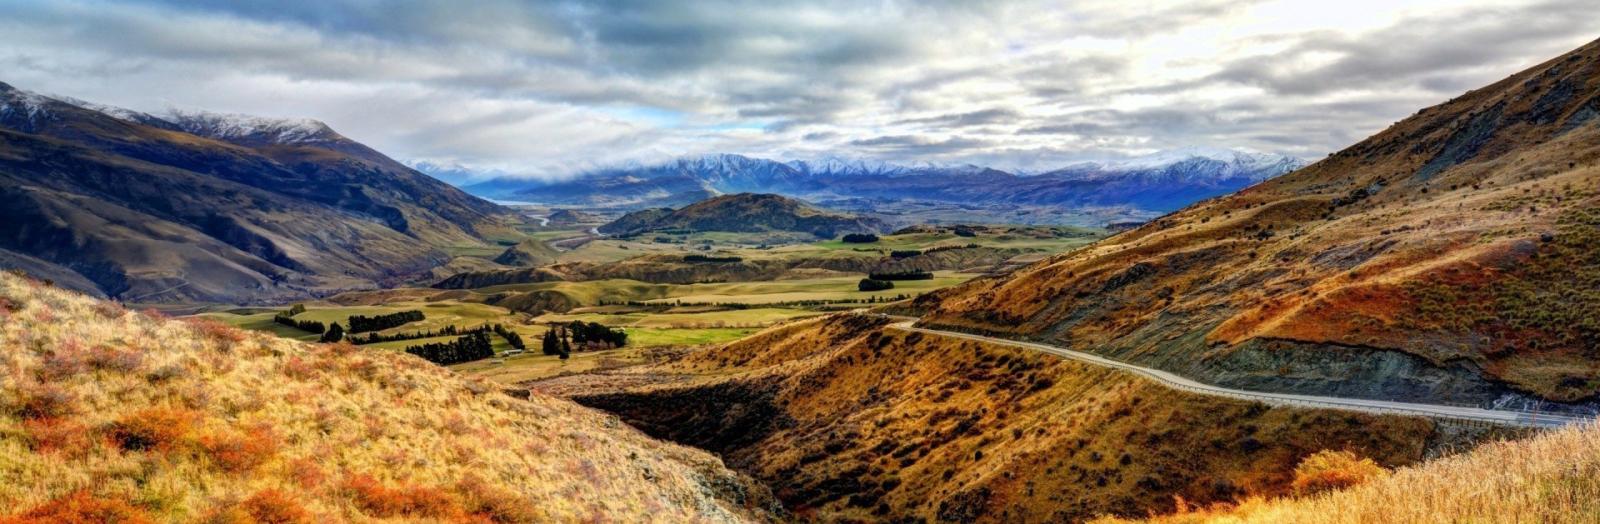 Long and meandering road into New Zealand's high country.